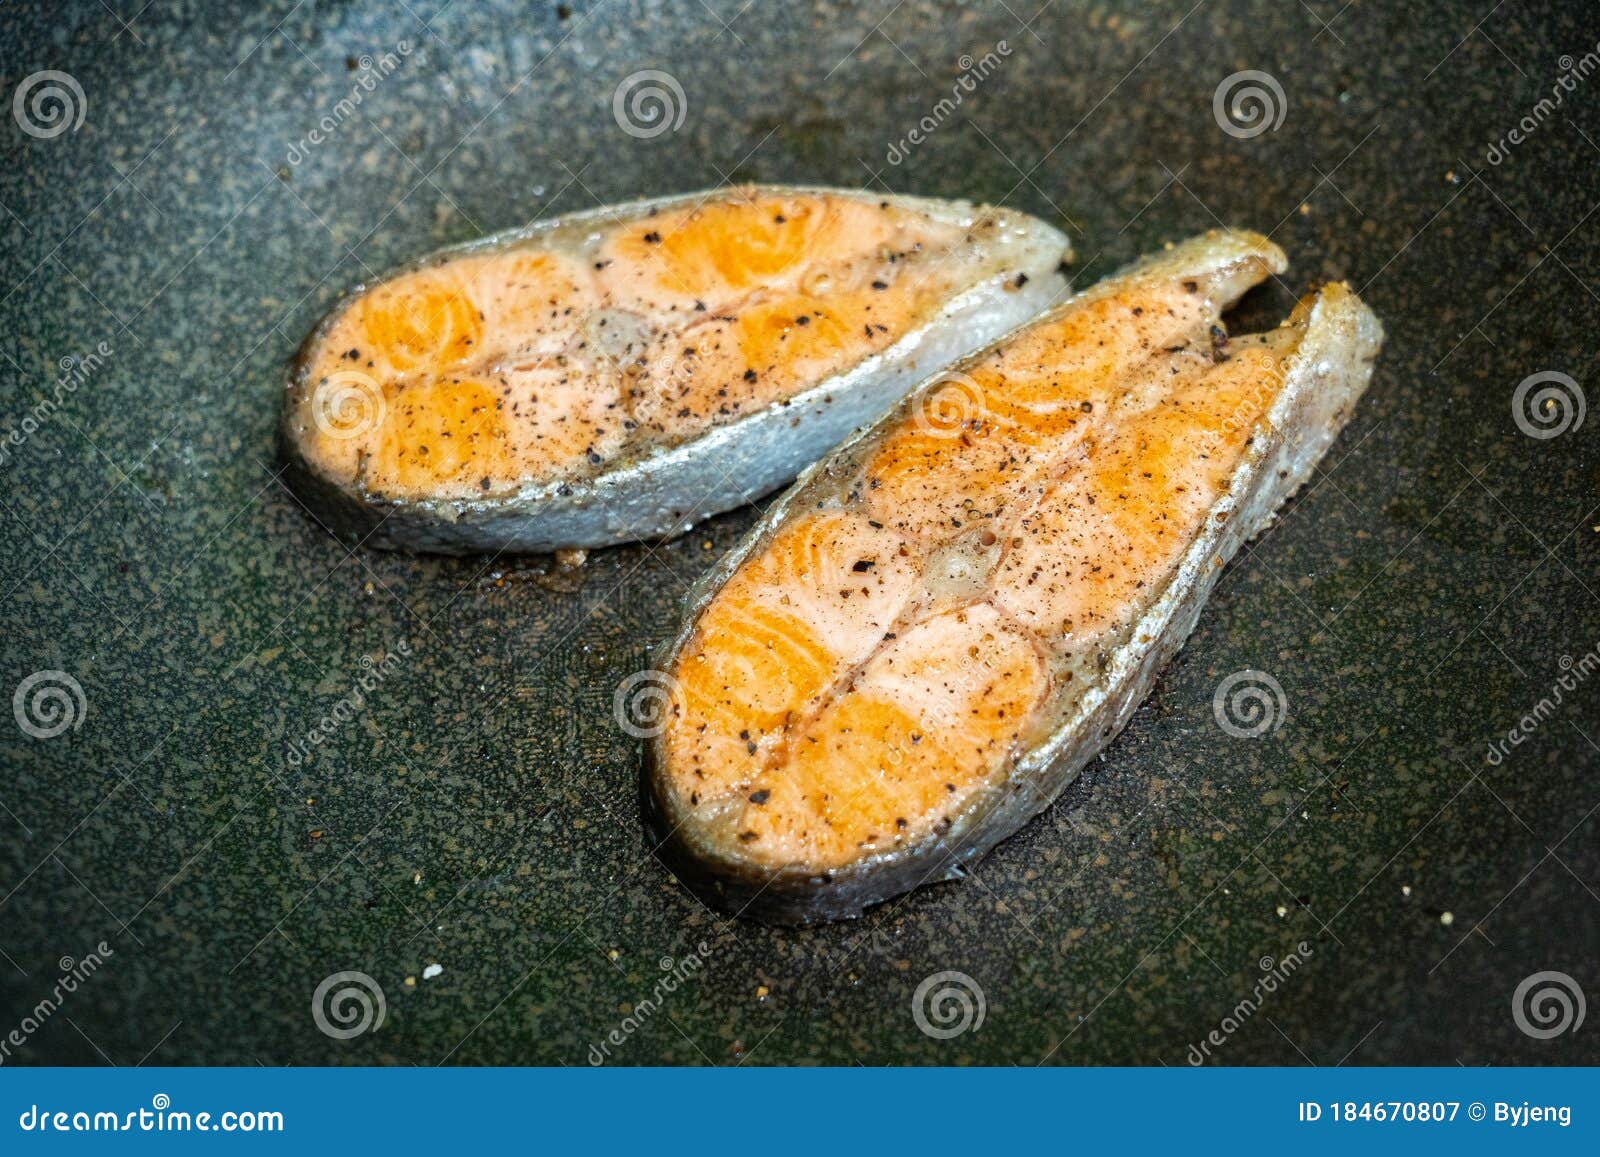 Salmon frying in a pan stock image. Image of herbs, black - 184670807